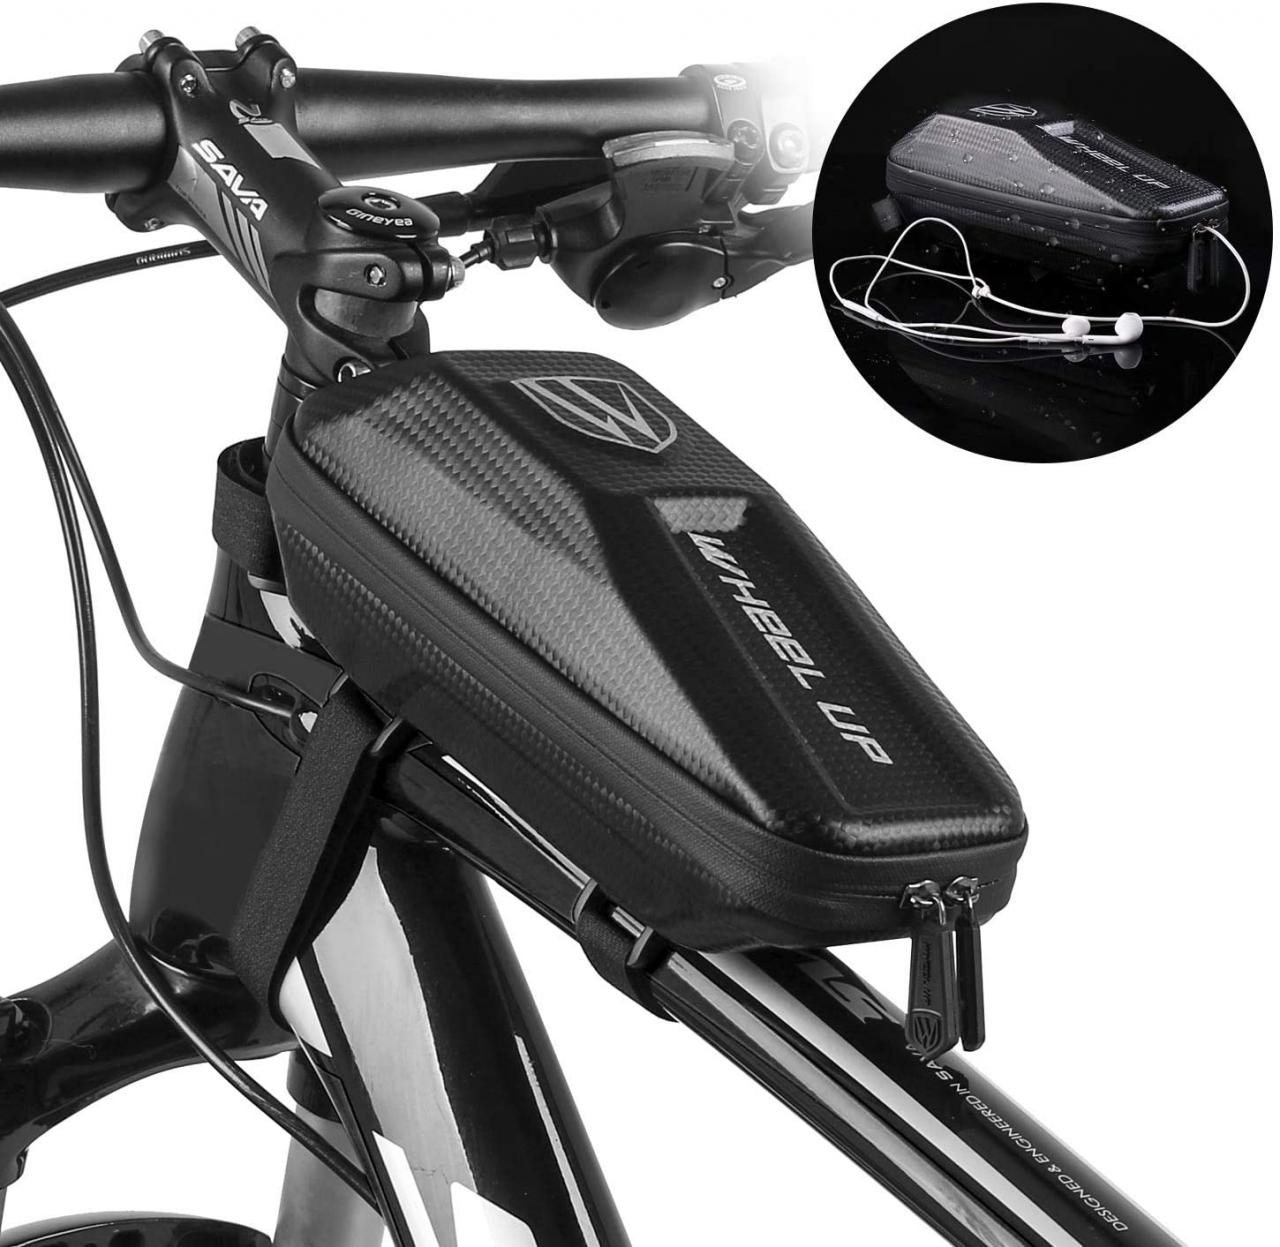 FlexDin Bike Frame Bag Waterproof Bicycle Top Tube Bag EVA Shell Shockproof  Front Handlebar Pouch Holder for Cycling Accessories : Amazon.co.uk: Sports  & Outdoors